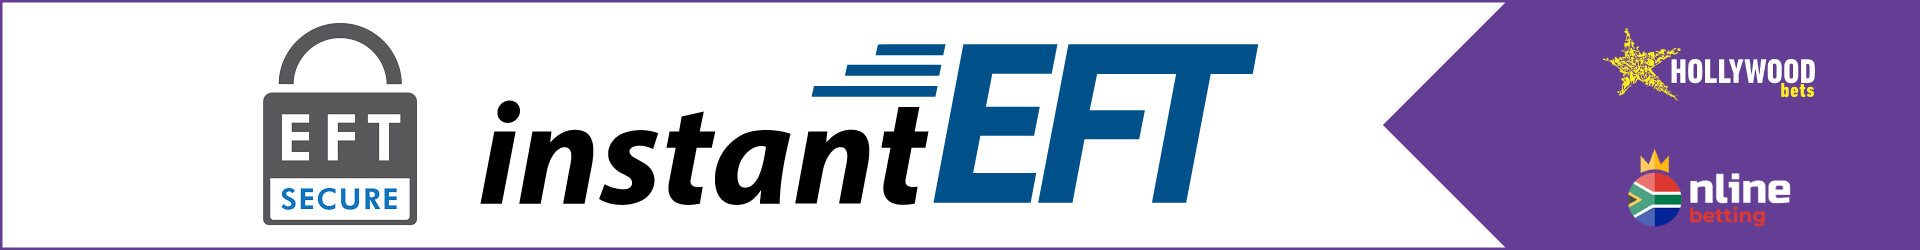 How to deposit money to HollywoodBets using EFT